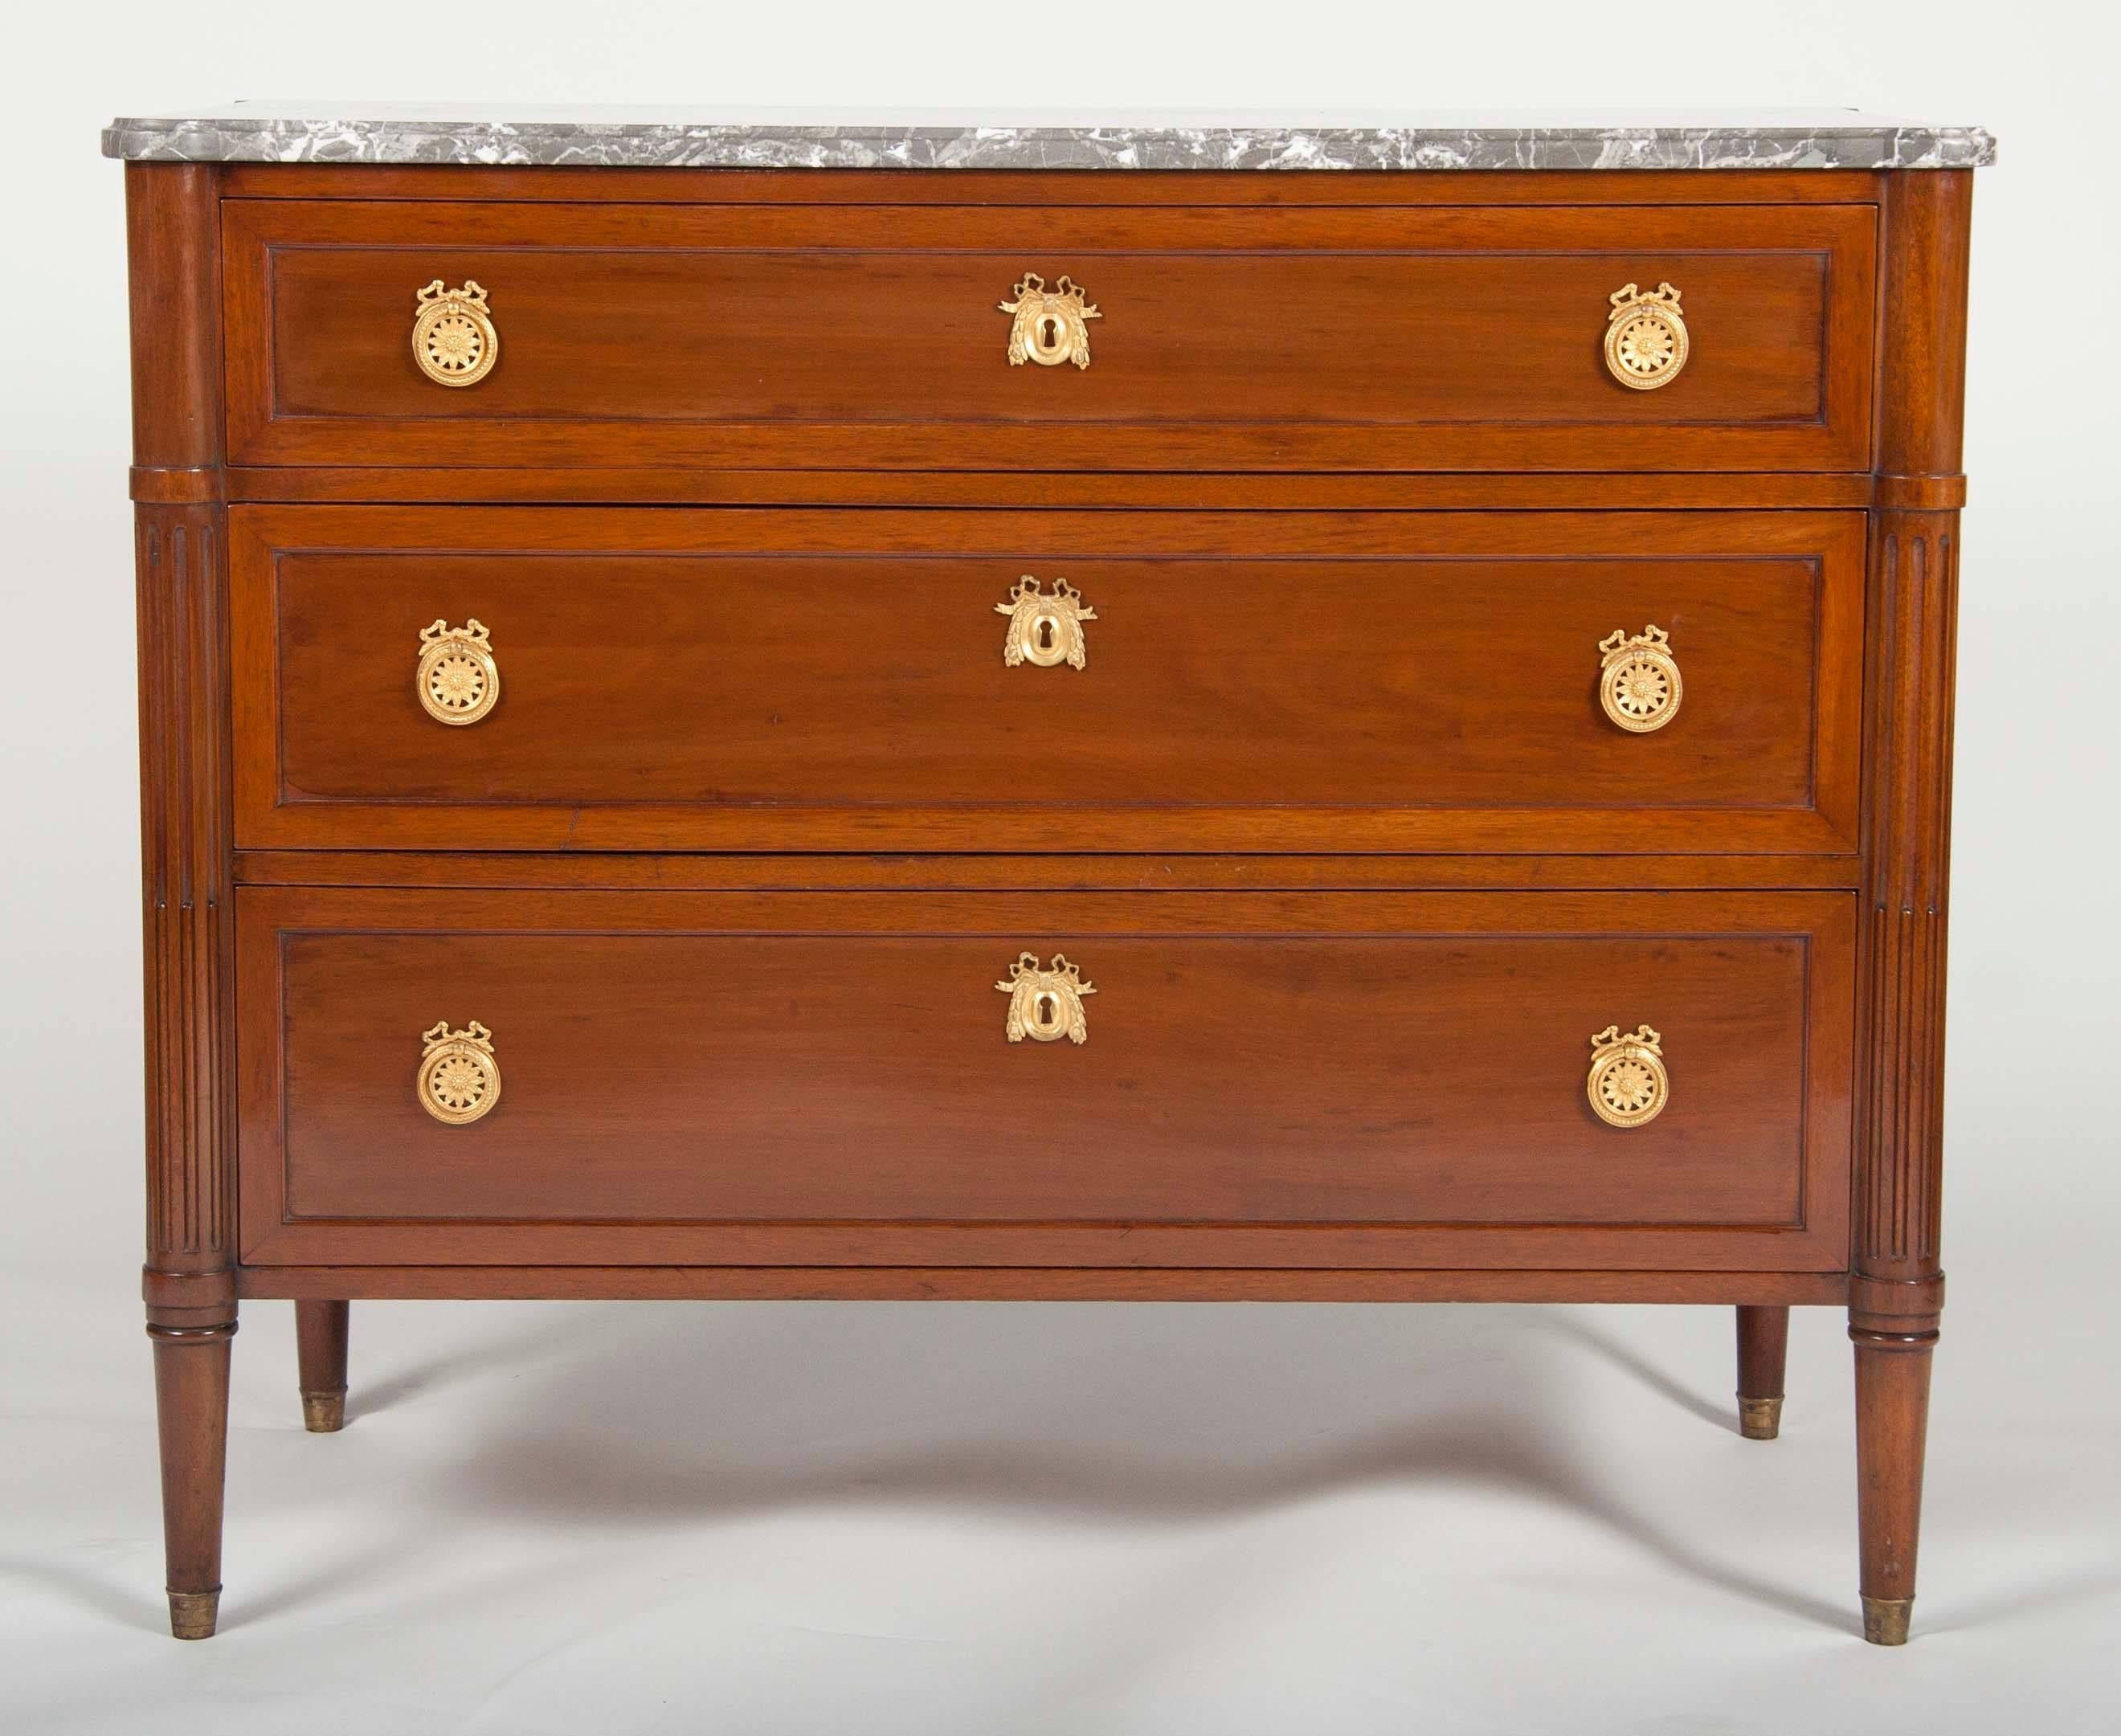 A pair of solid mahogany neoclassical style three-drawer marble-top commodes.